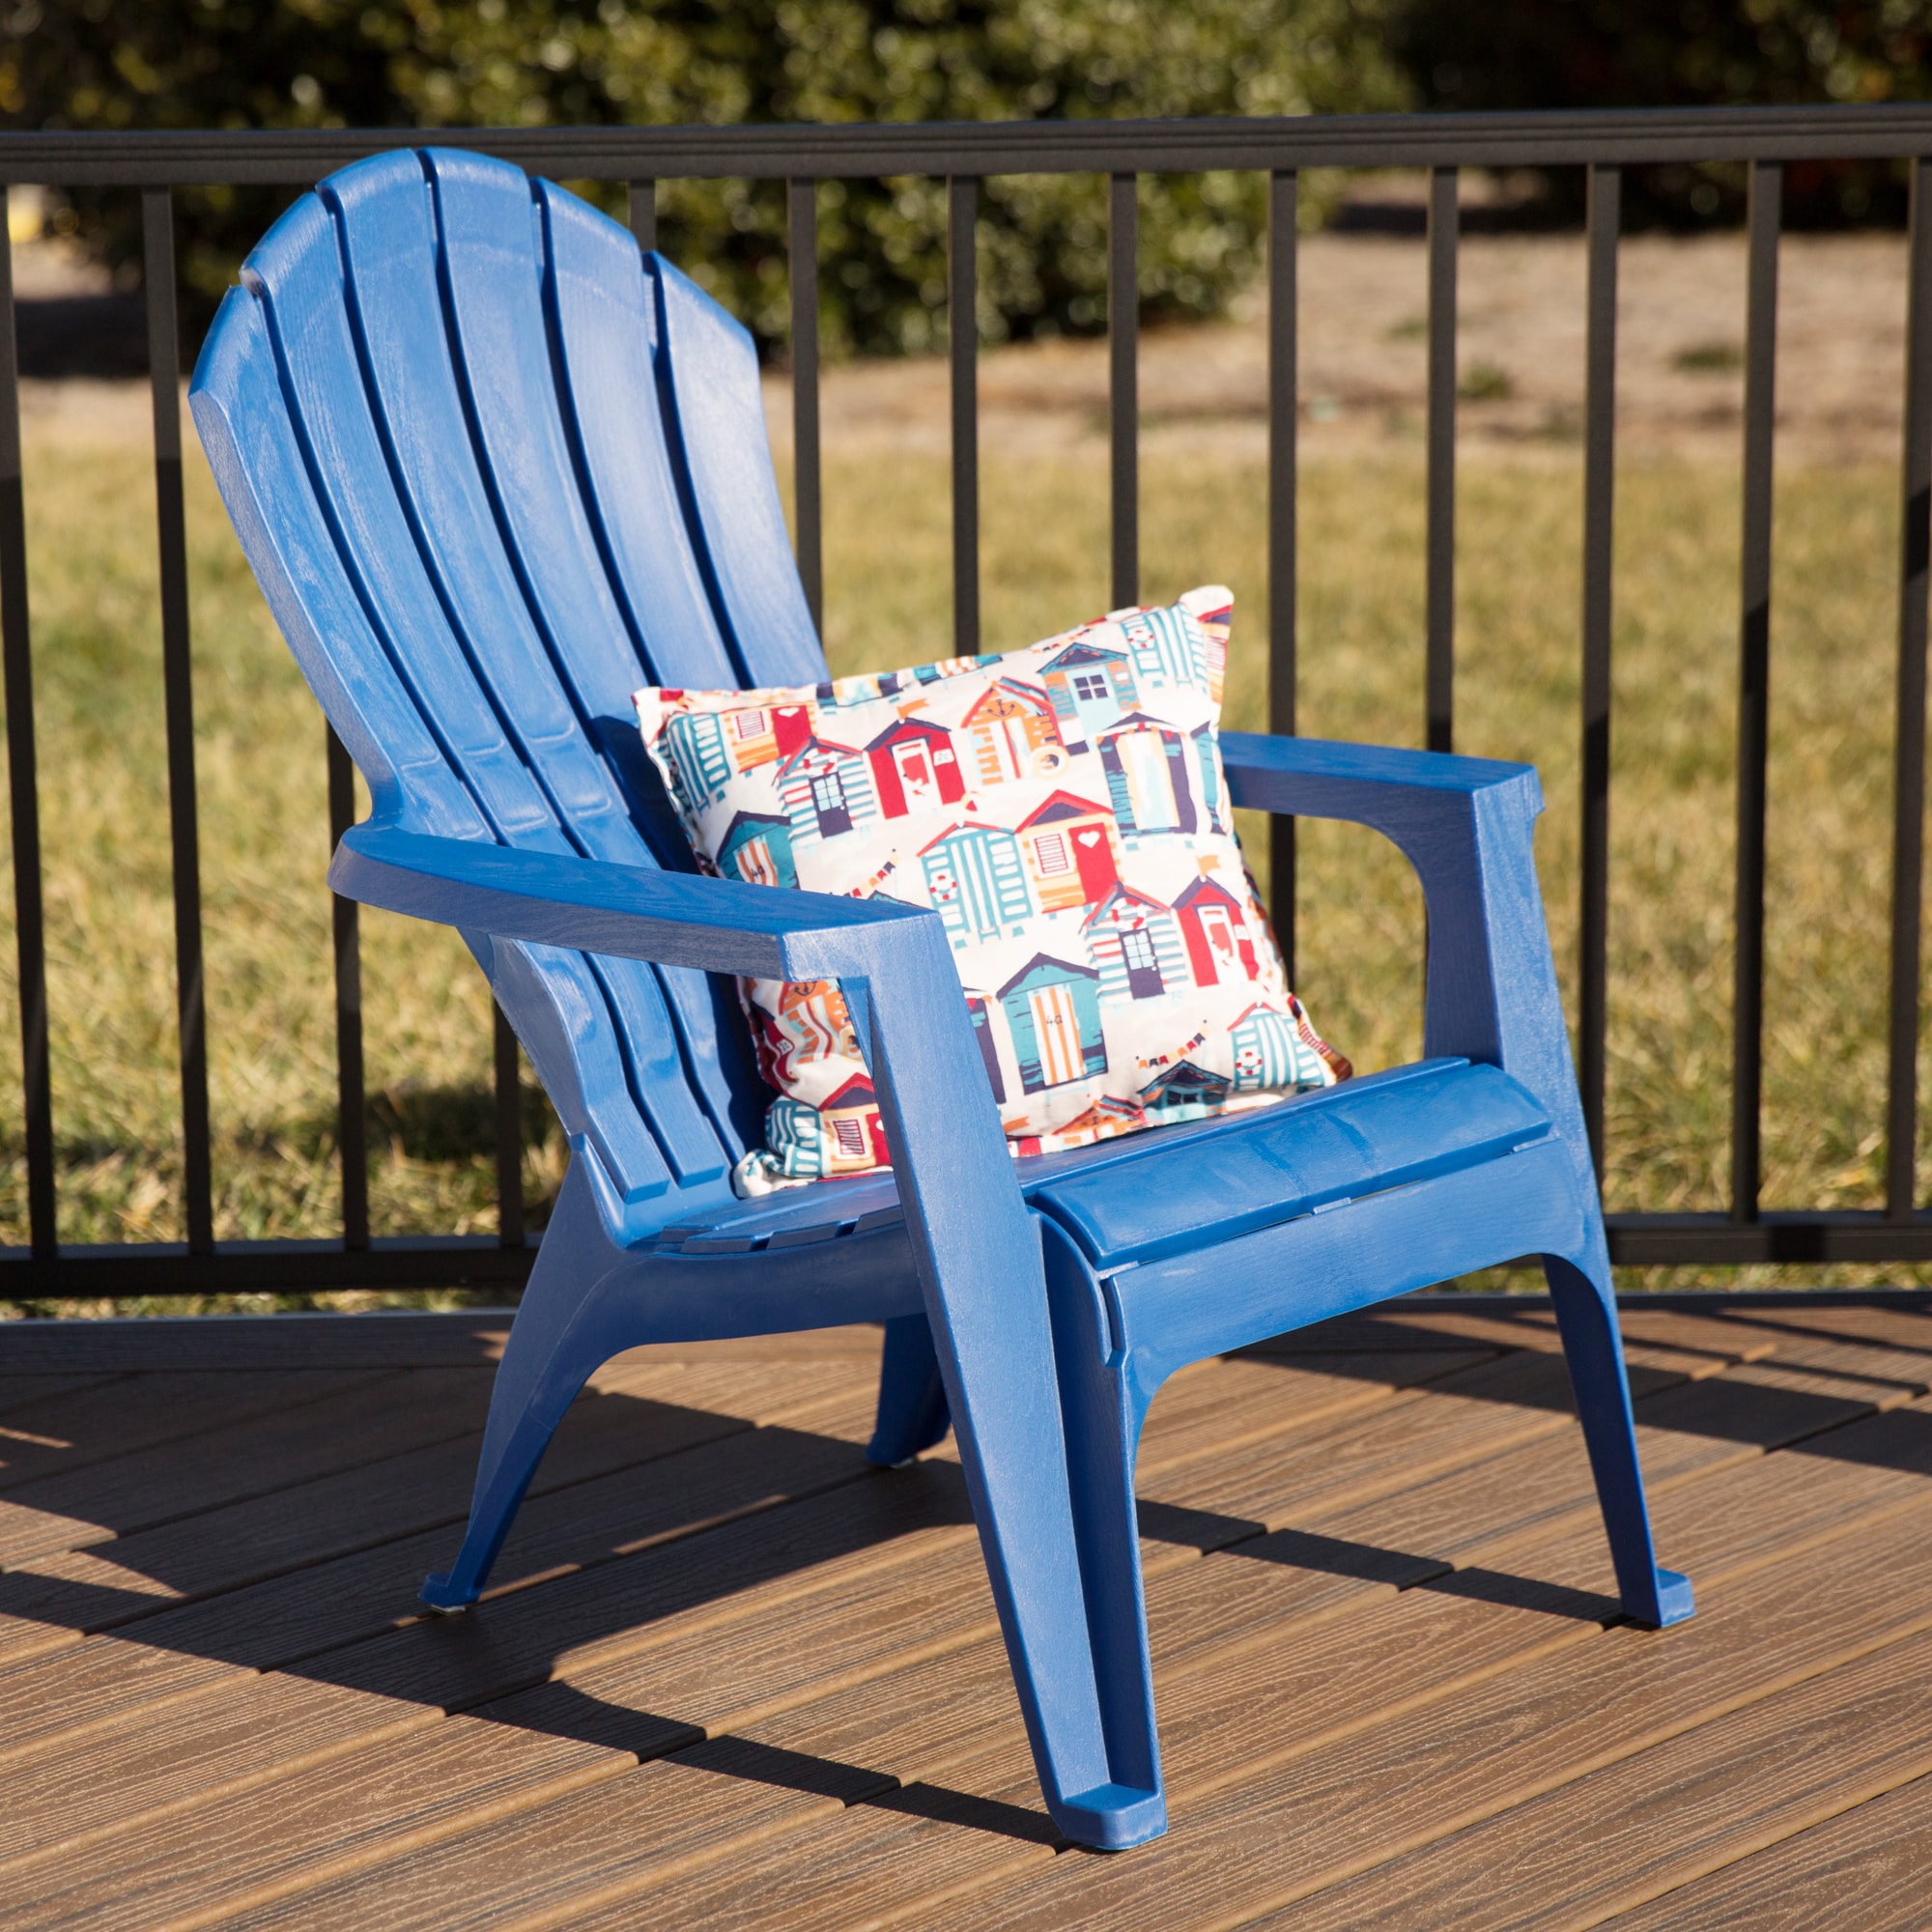 Adams Manufacturing Realcomfort, Plastic Yard Chairs At Lowe S